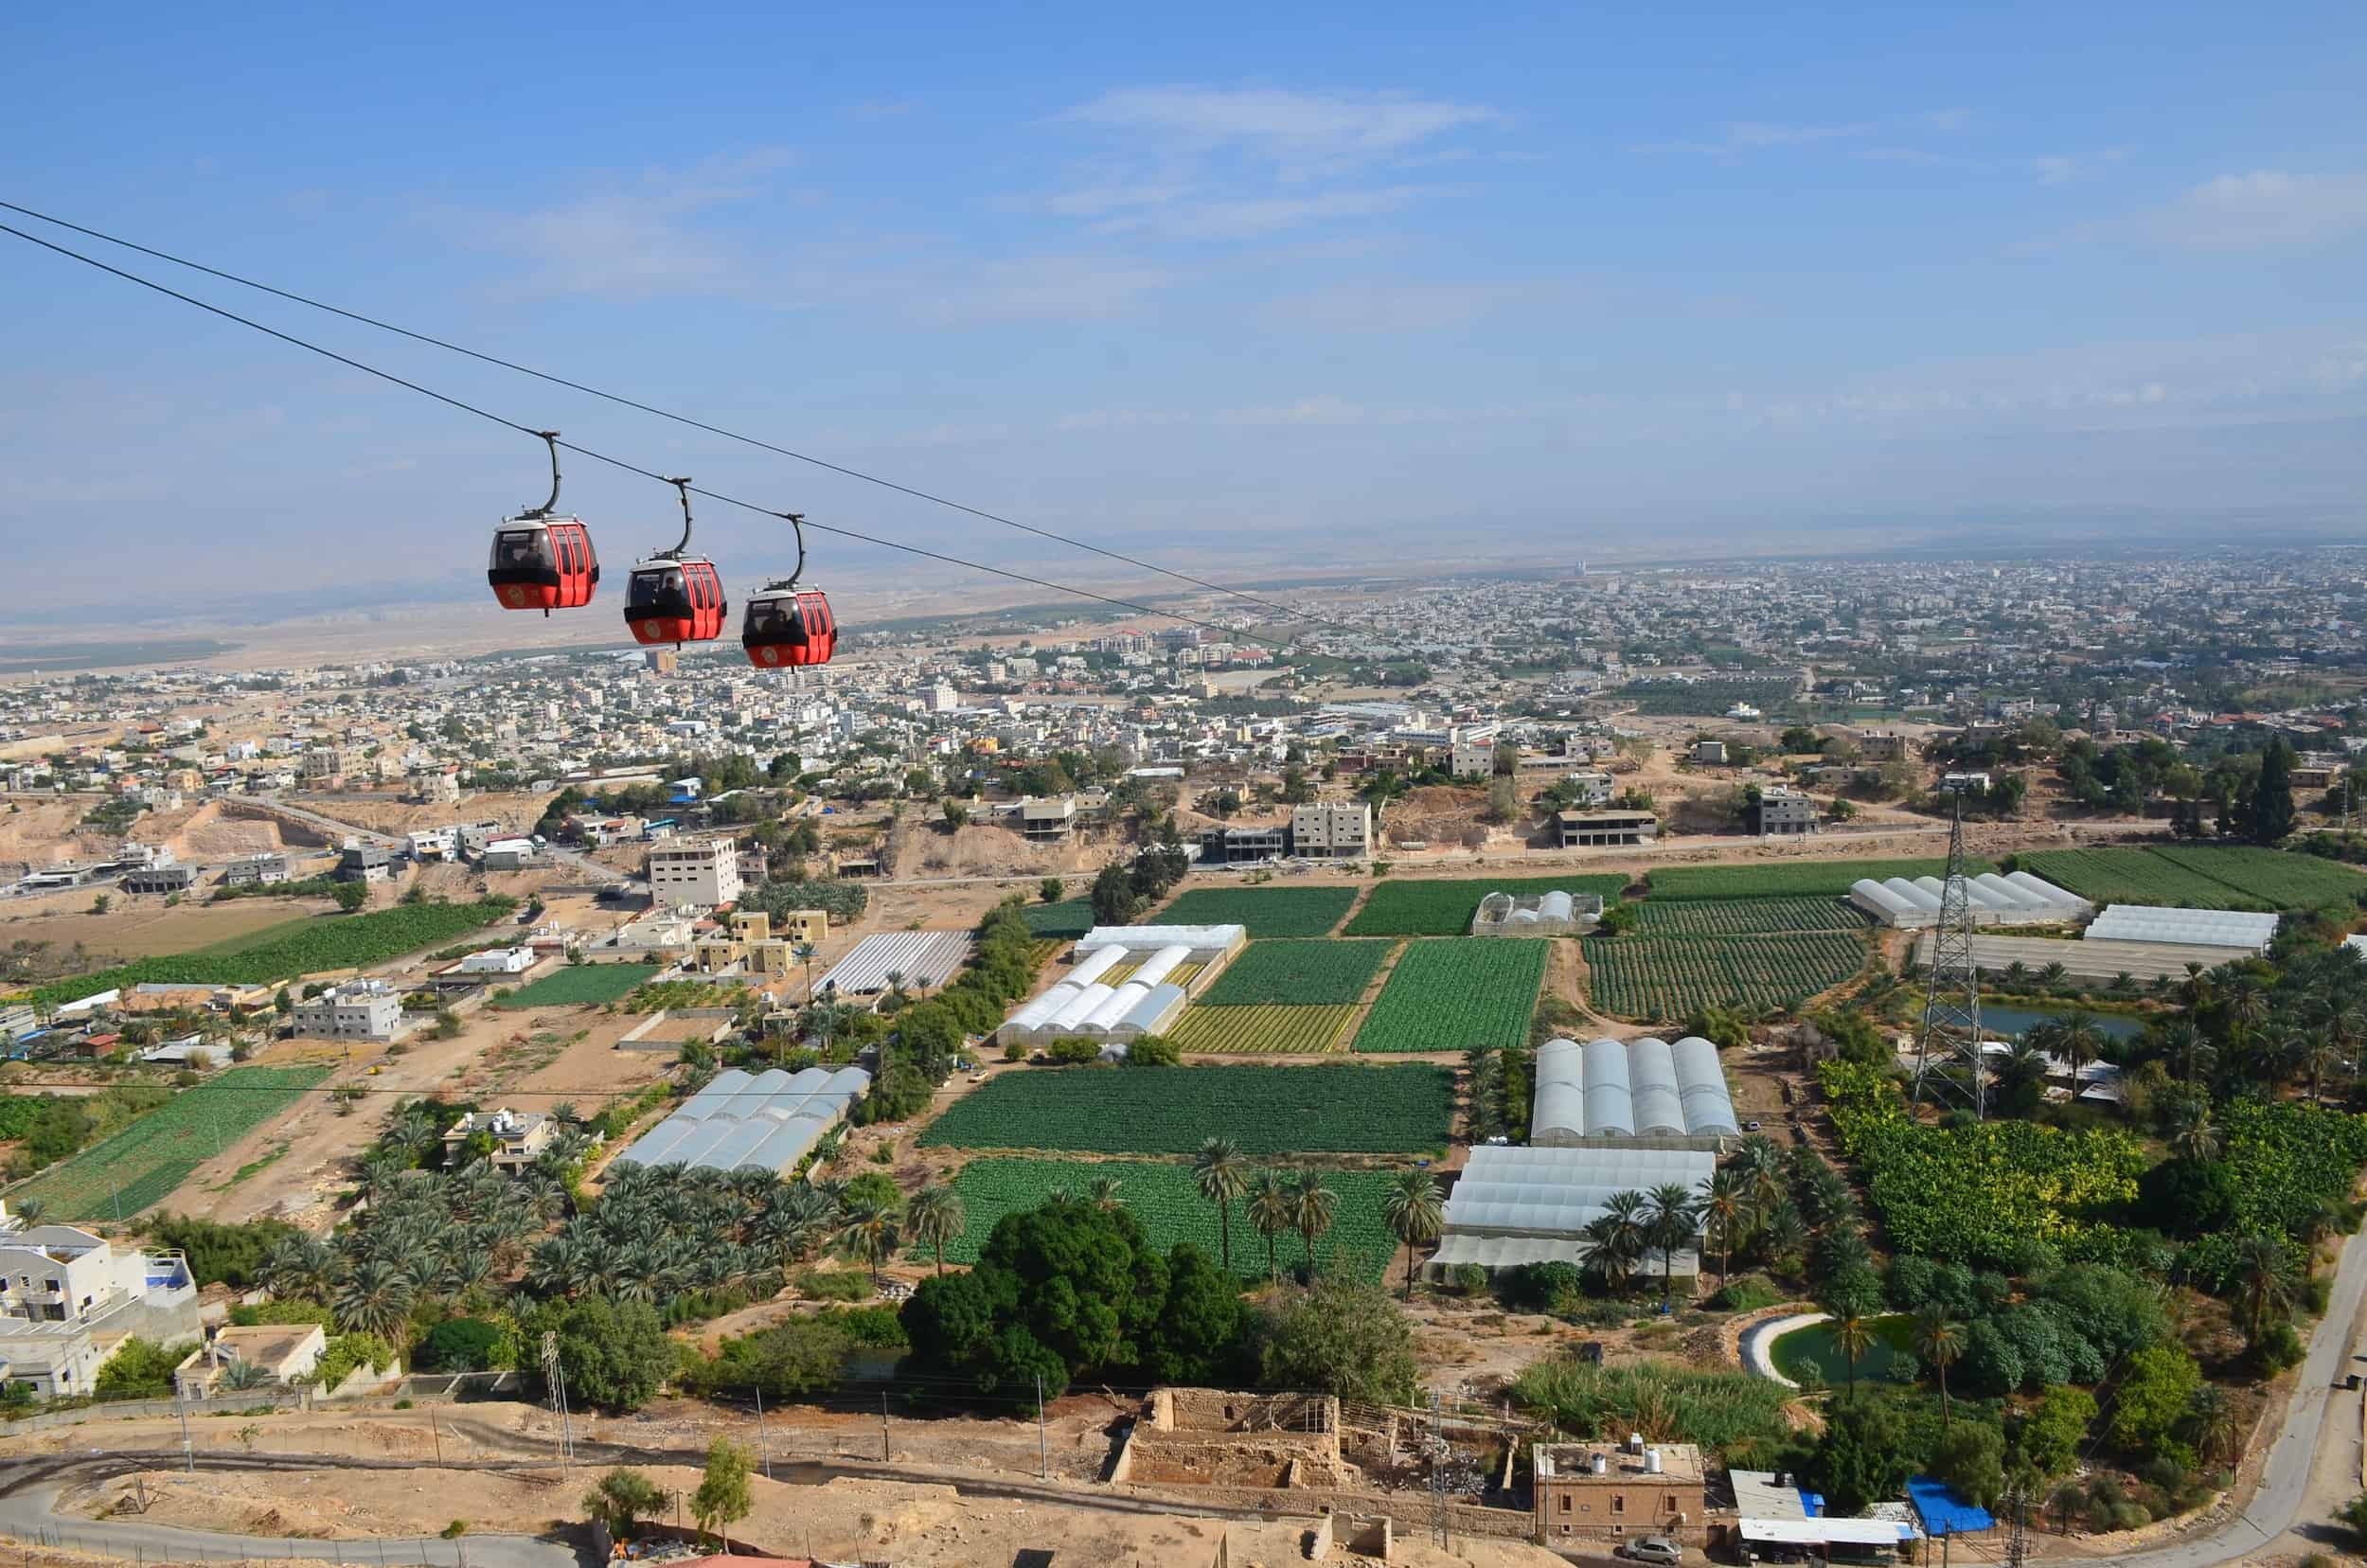 Jericho Cable Car in Jericho, Palestine